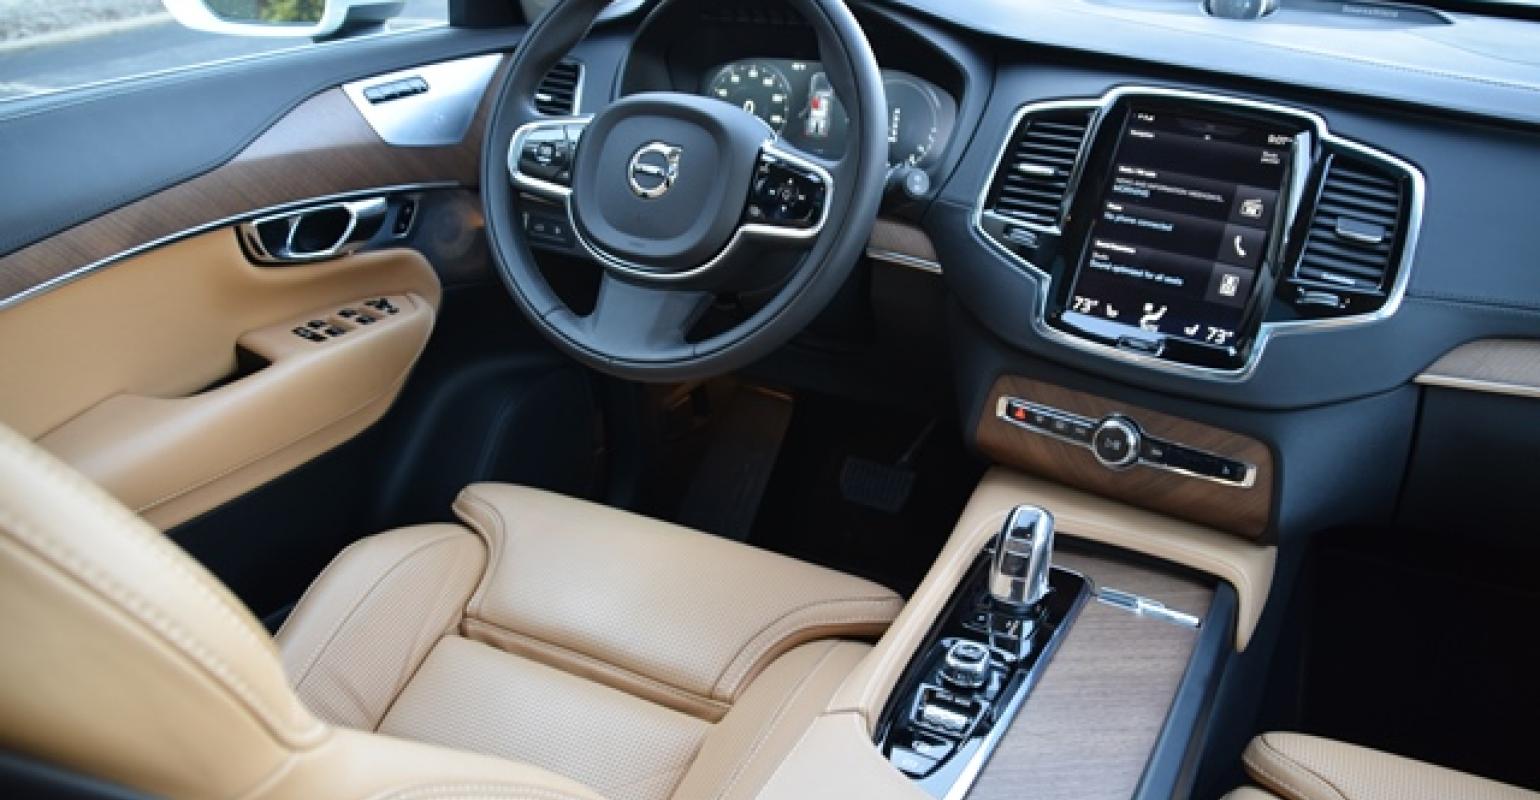 Volvo XC90 Cabin Delivers Hypnotic Beauty Wards 10 Best Interiors